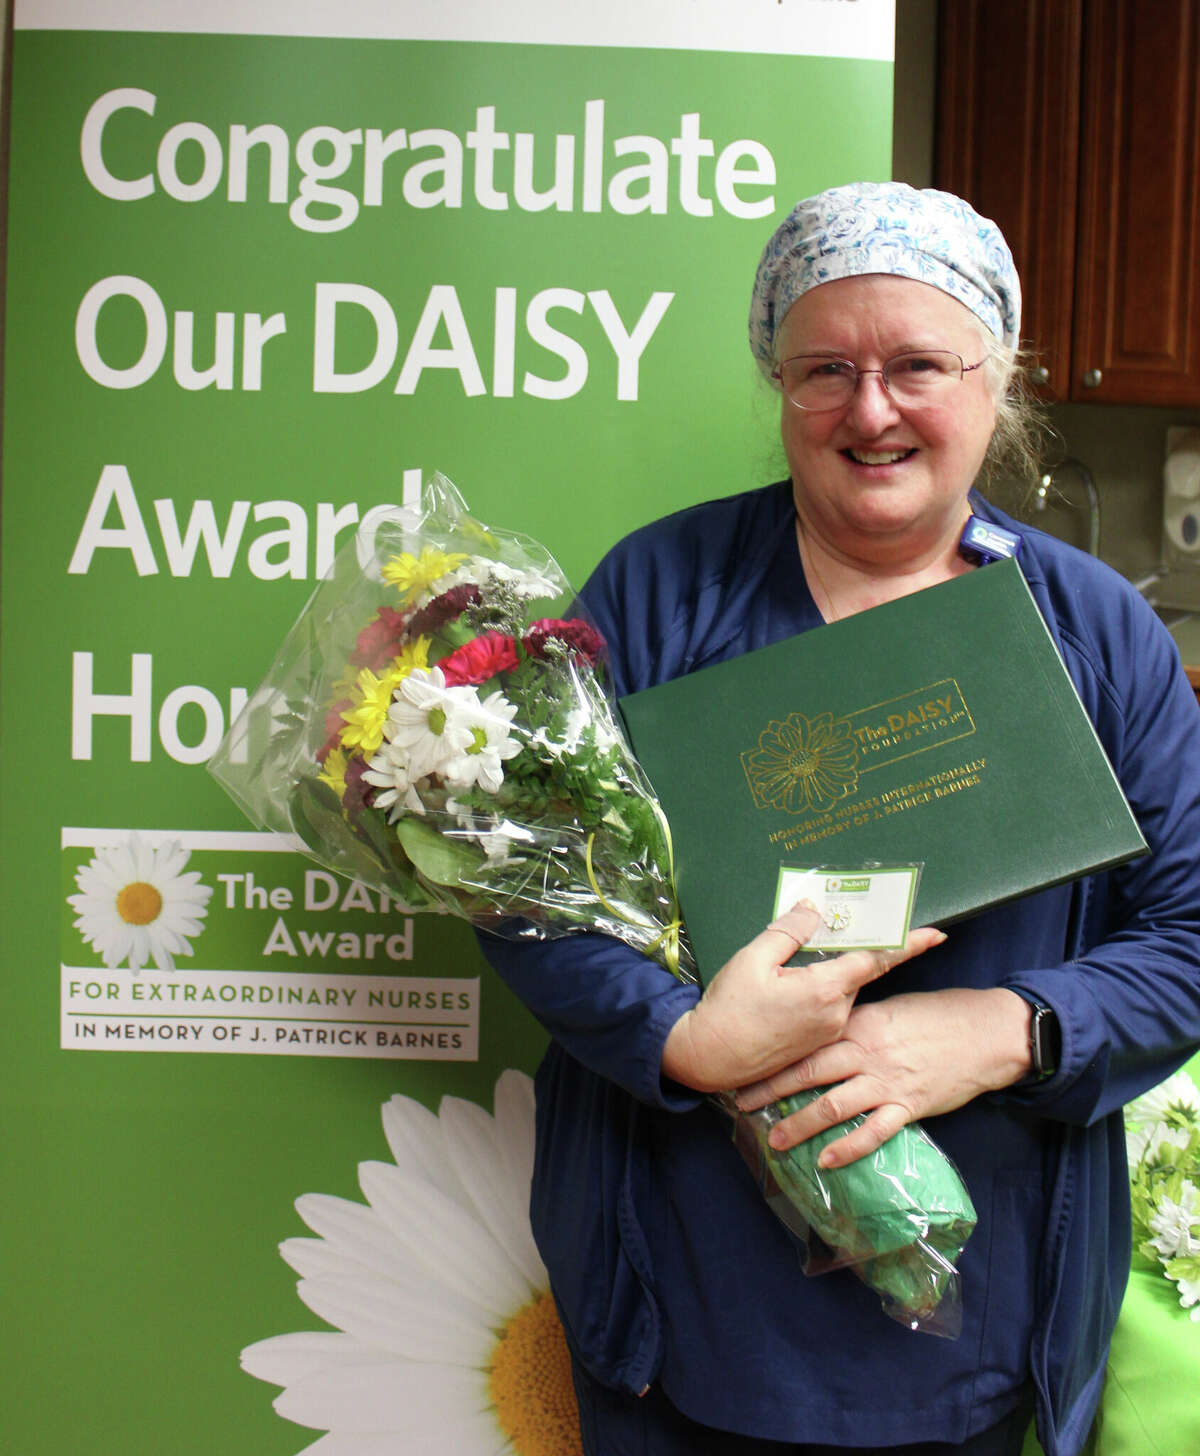 Micki Doherty, RN, who works in the Reed City Hospital inpatient department, was honored with a DAISY Award after being nominated by a recent patient. 